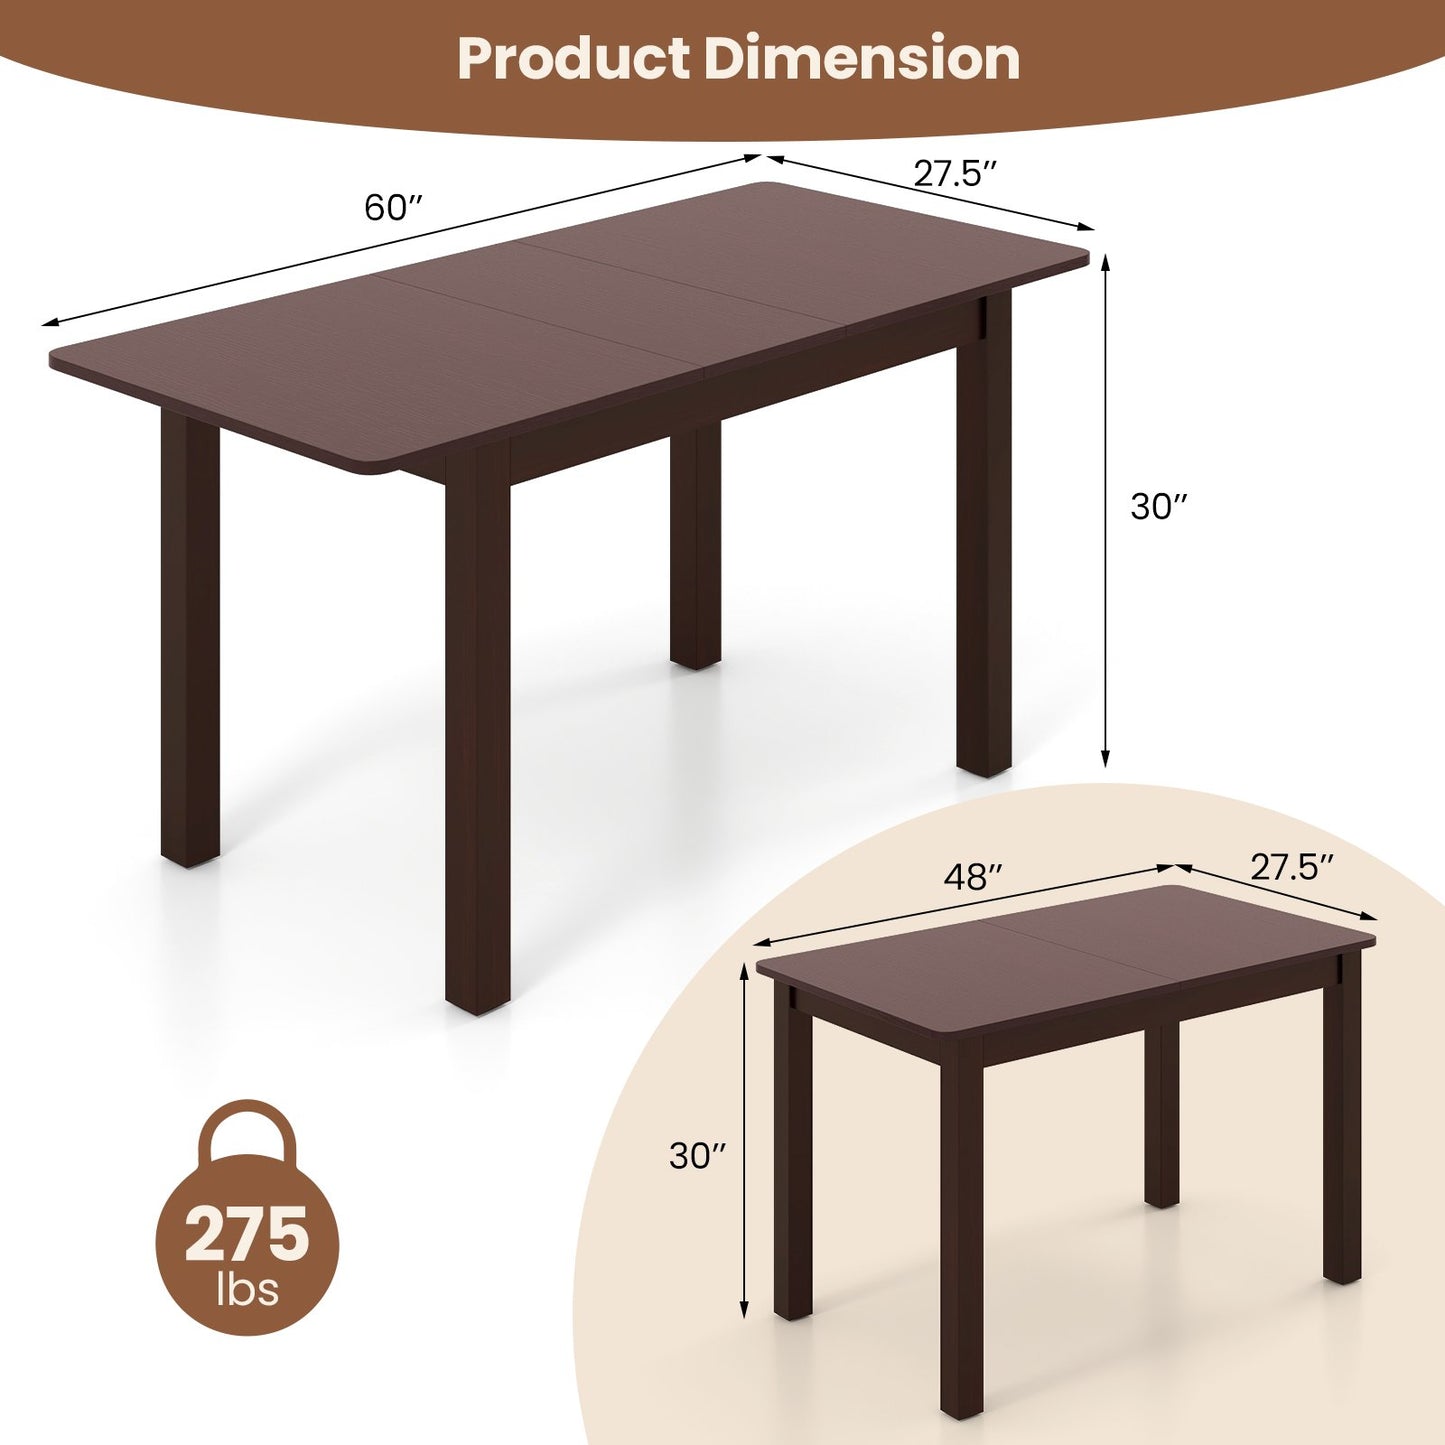 Extendable Folding Dining Table with Rubber Wood Frame and Safety Locks, Coffee